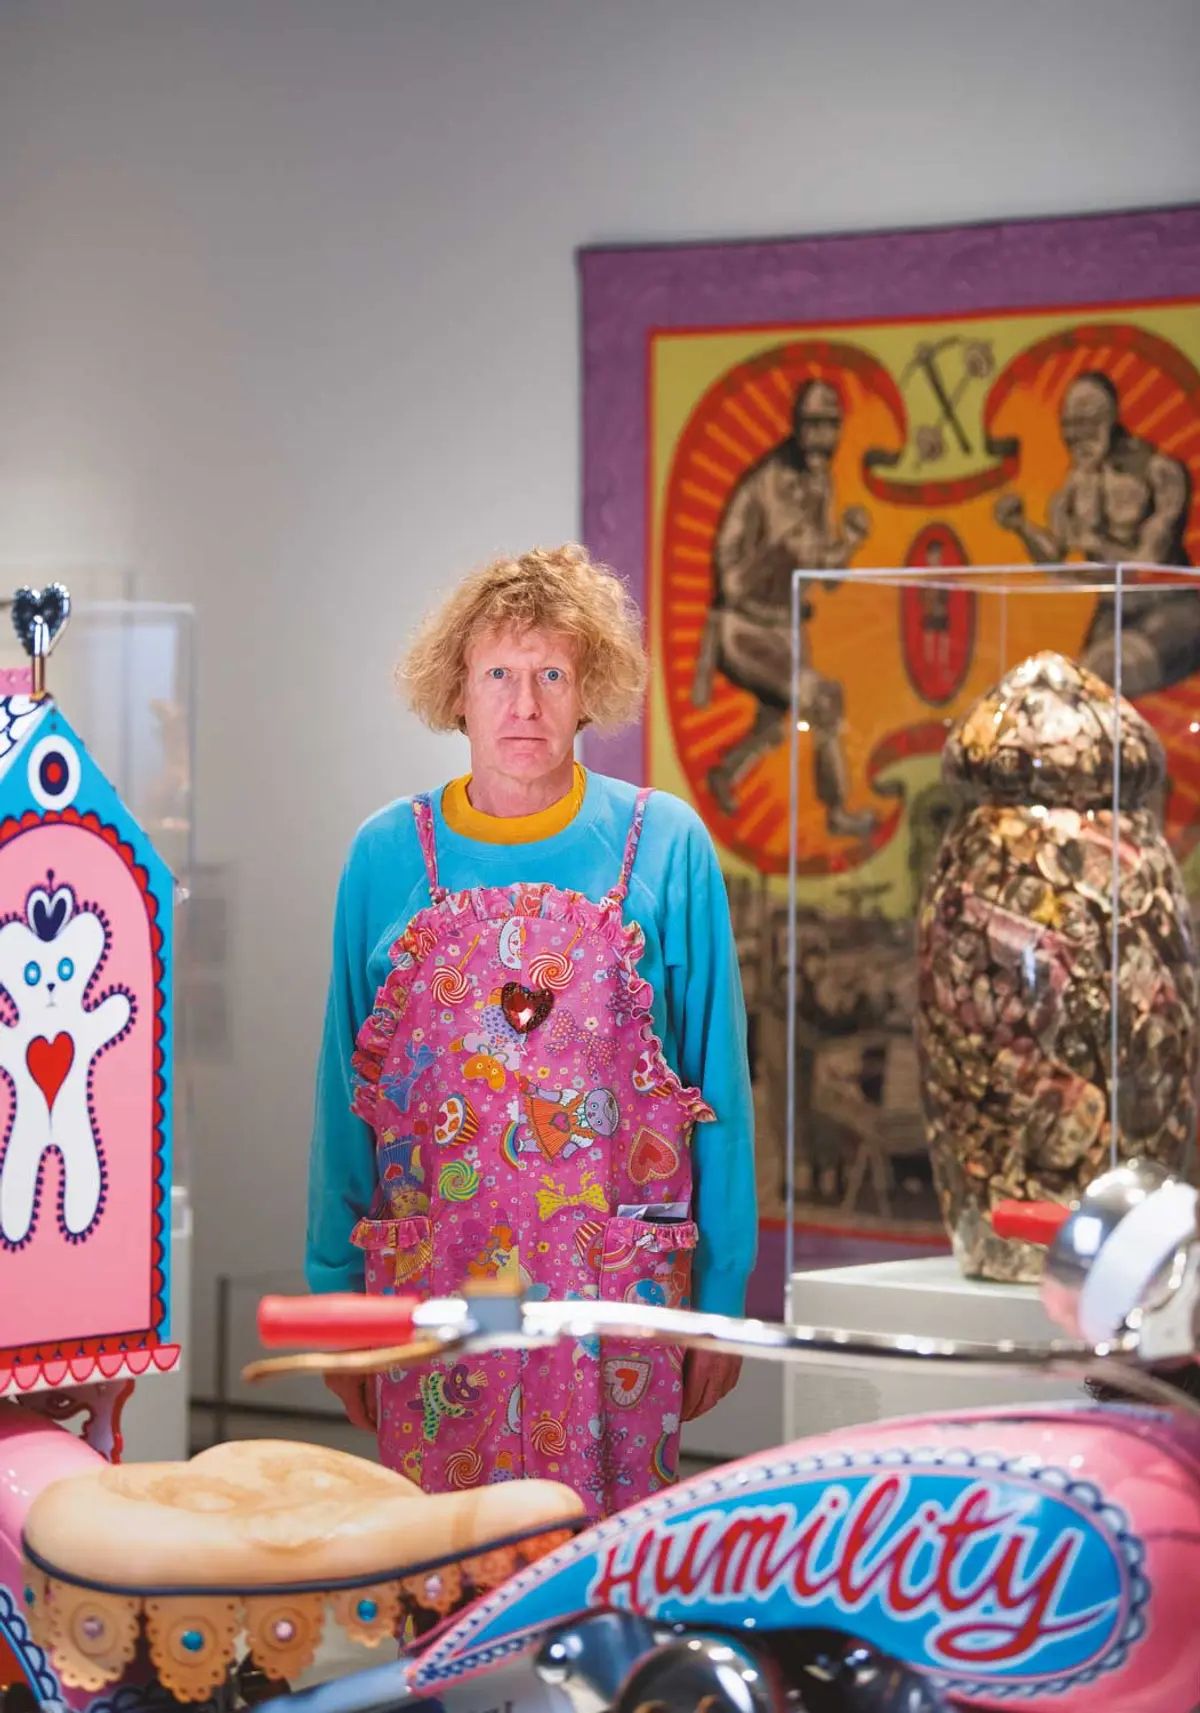 Grayson Perry

Photo: Annar Bjorgli; courtesy National Museum of Norway